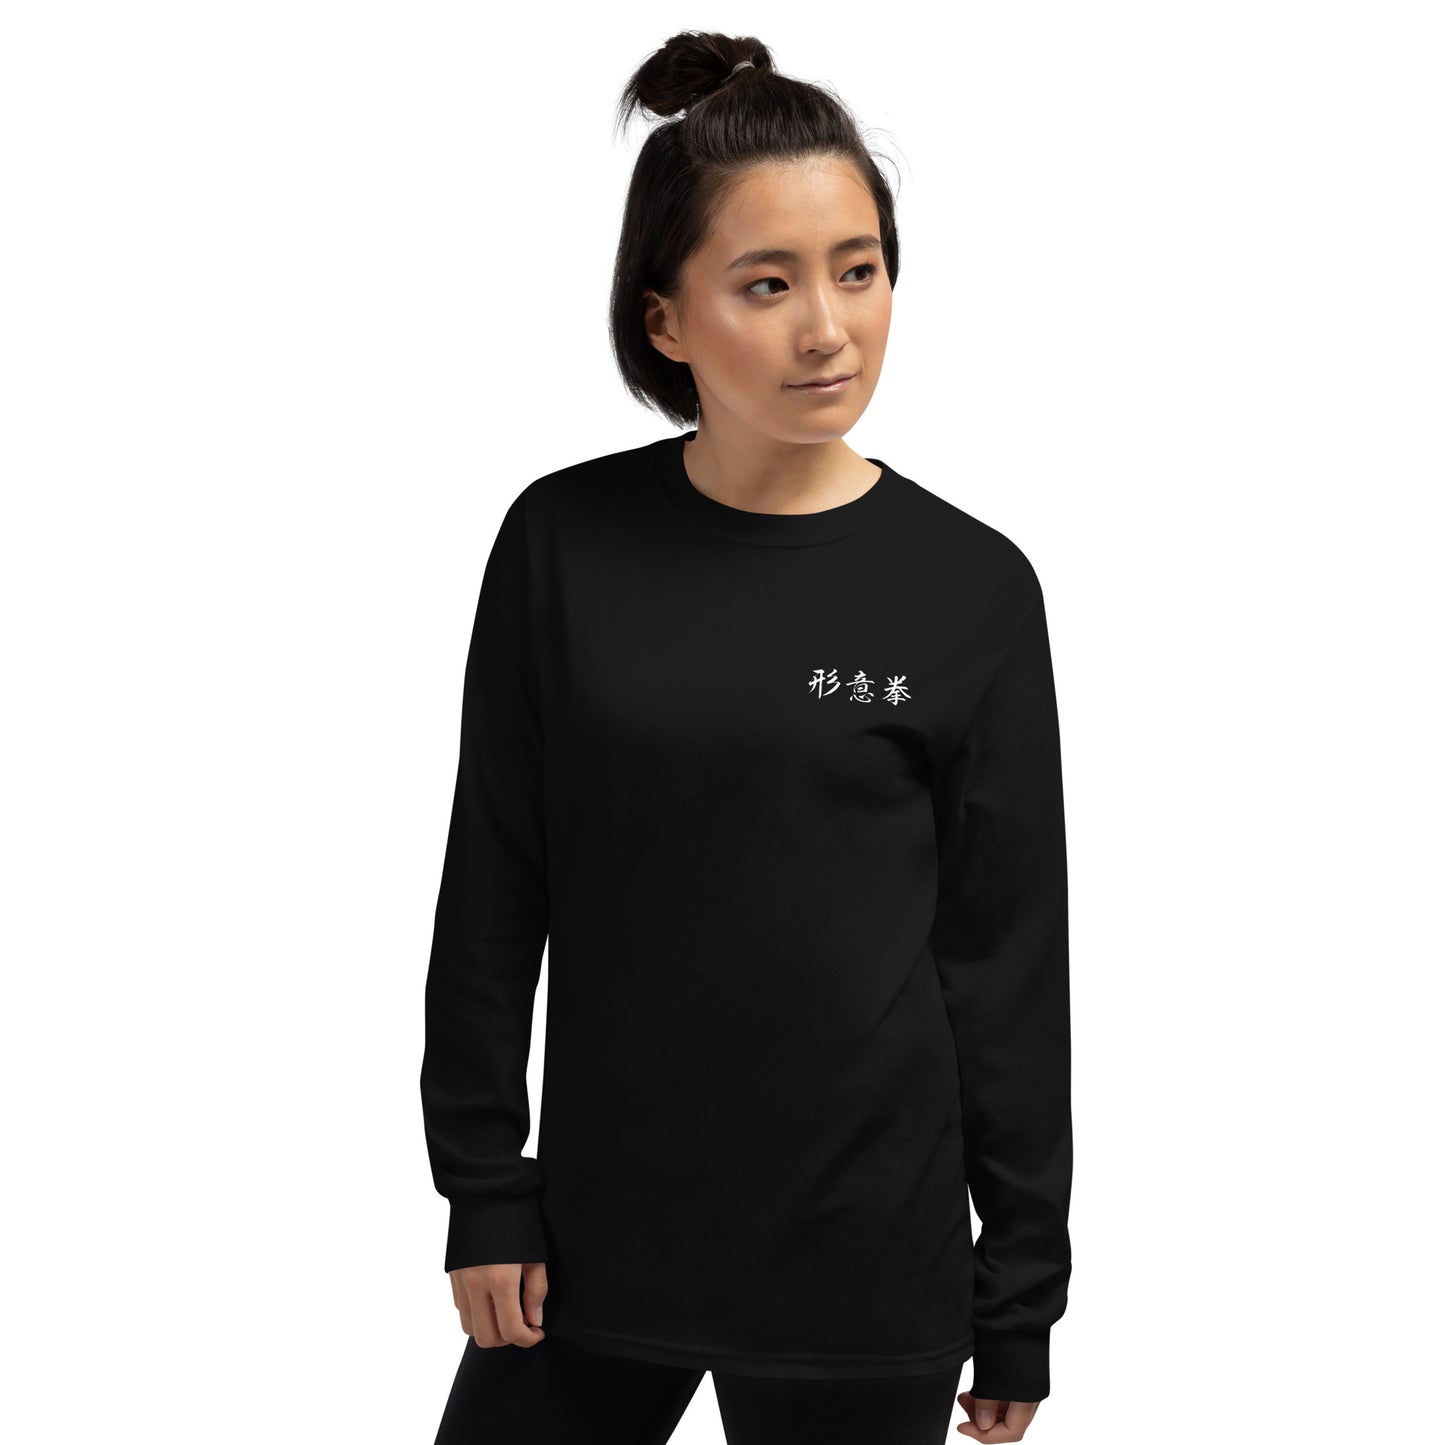 Hsing I Chuan tee - Long sleeve (front only)